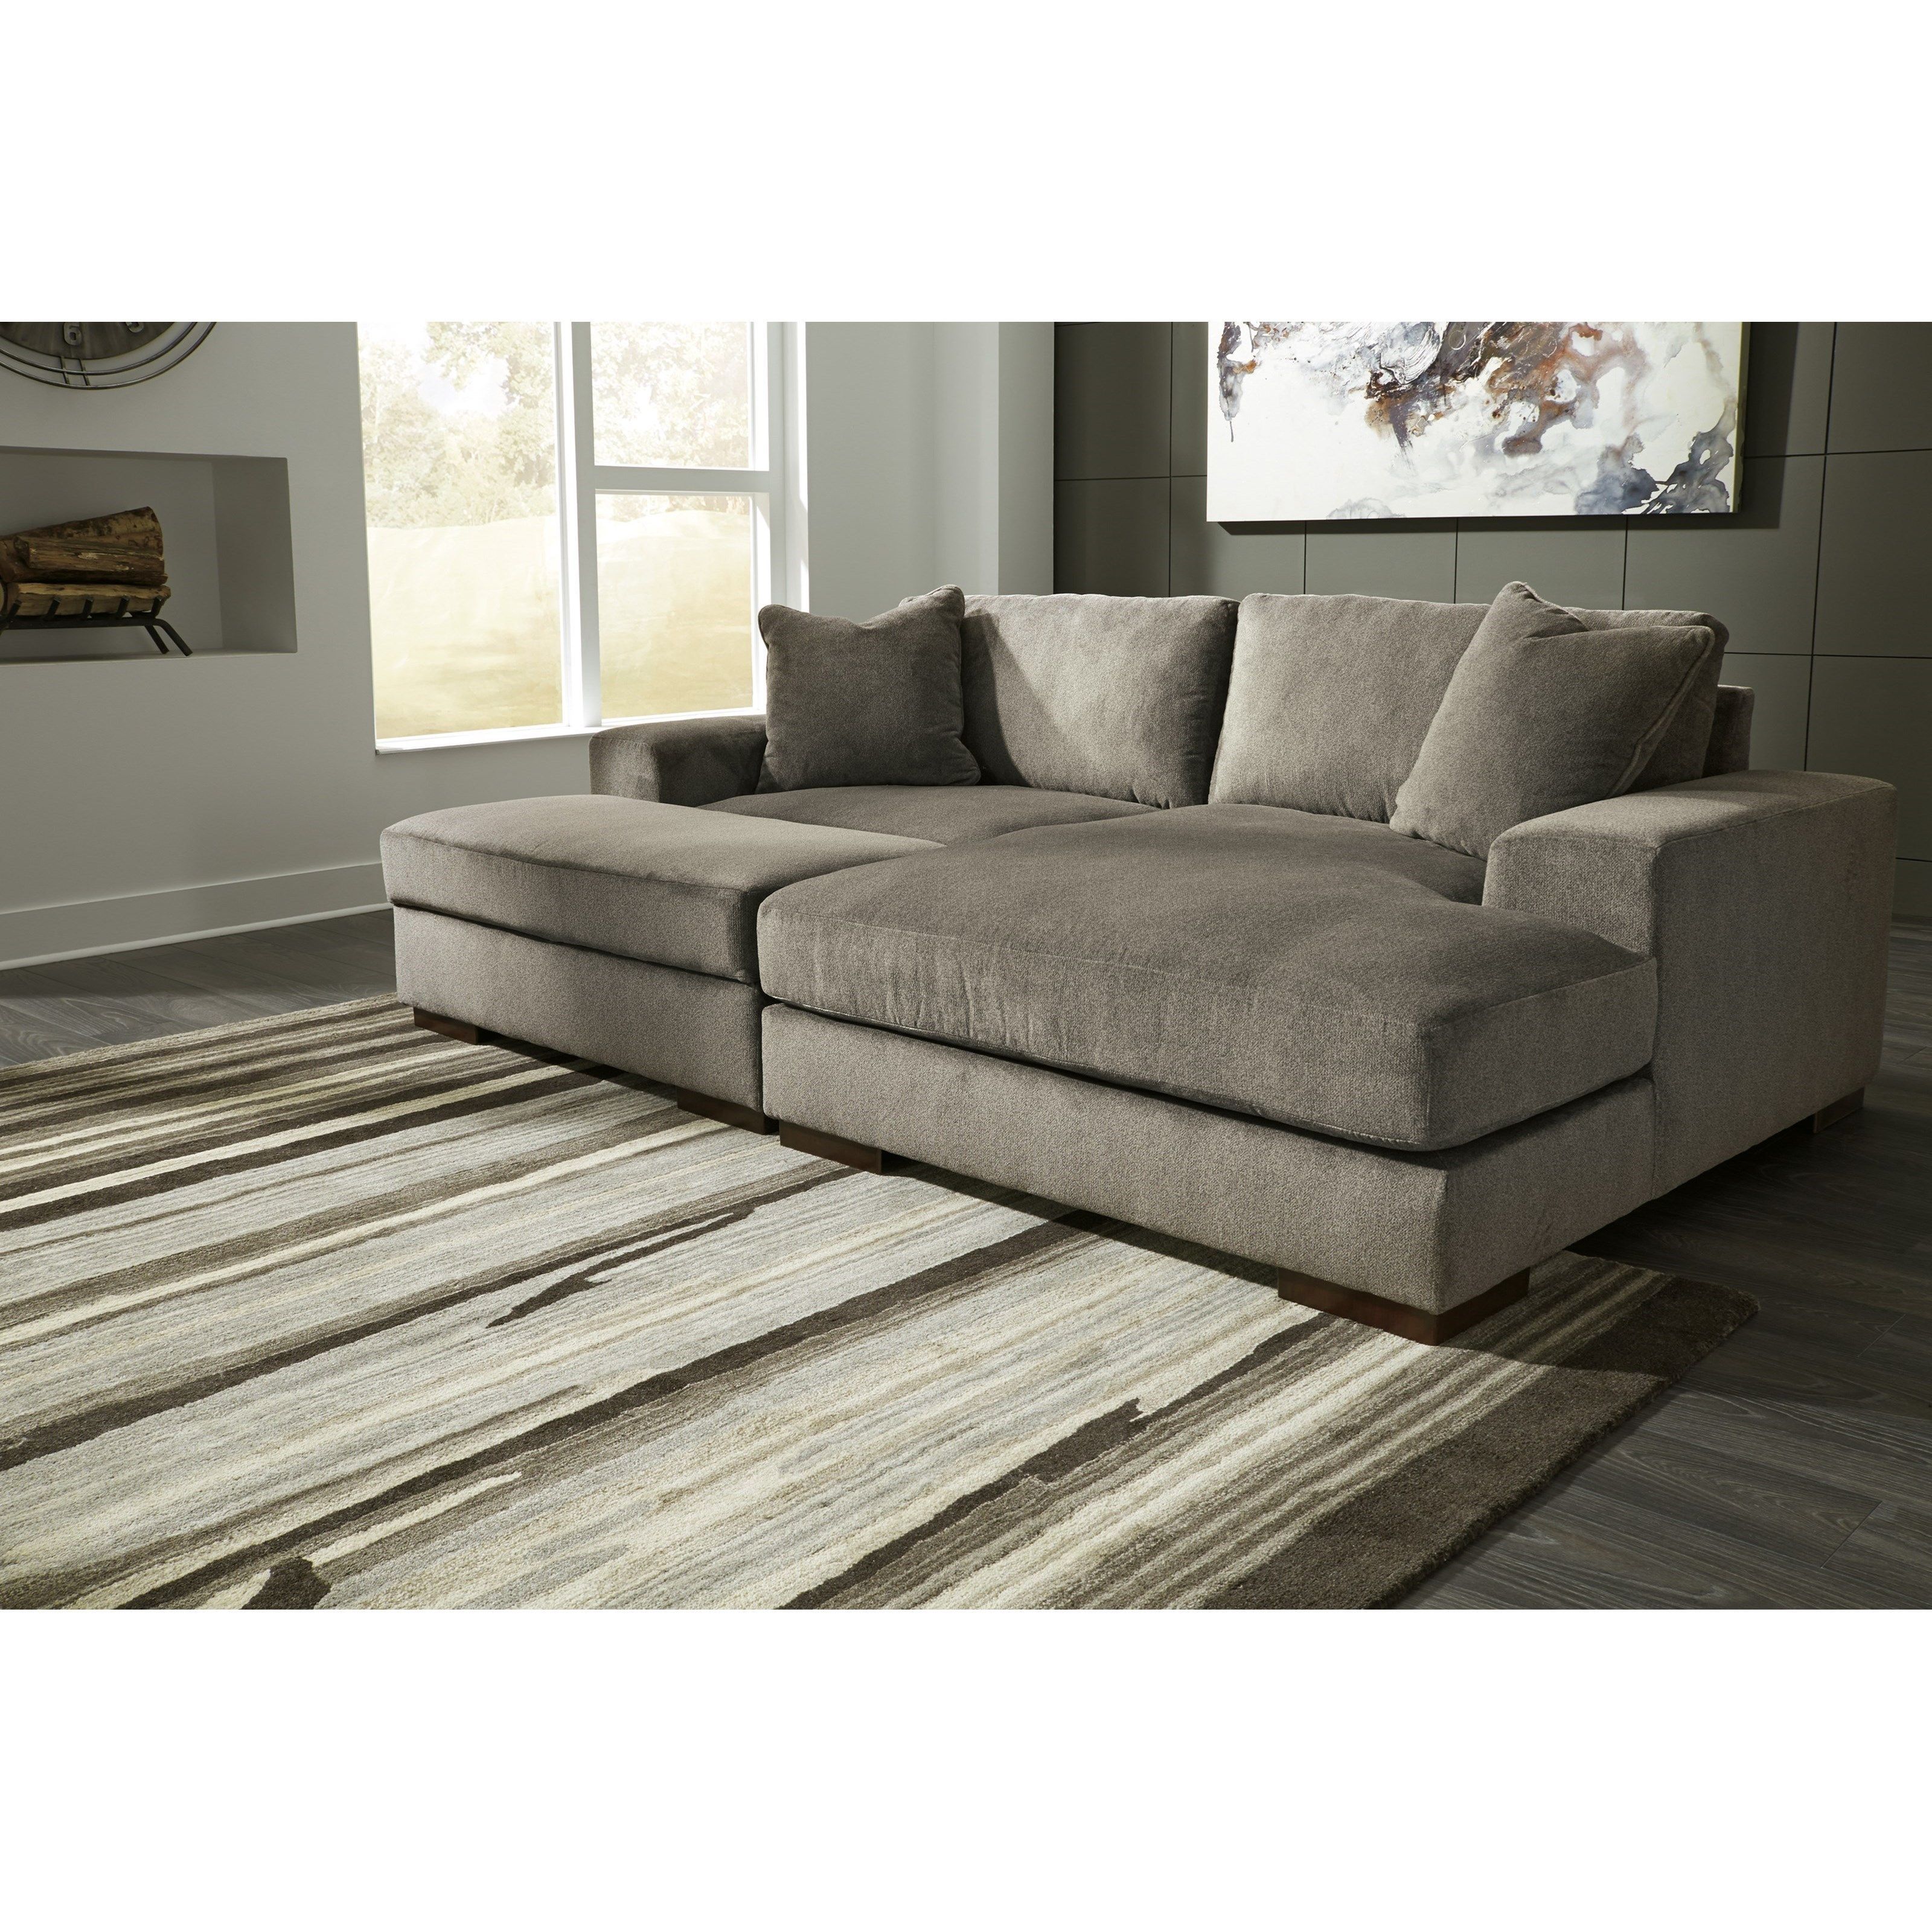 Manzani Contemporary 3 Piece Sectional With Ottomanbenchcraft For Norfolk Grey 3 Piece Sectionals With Laf Chaise (View 8 of 25)